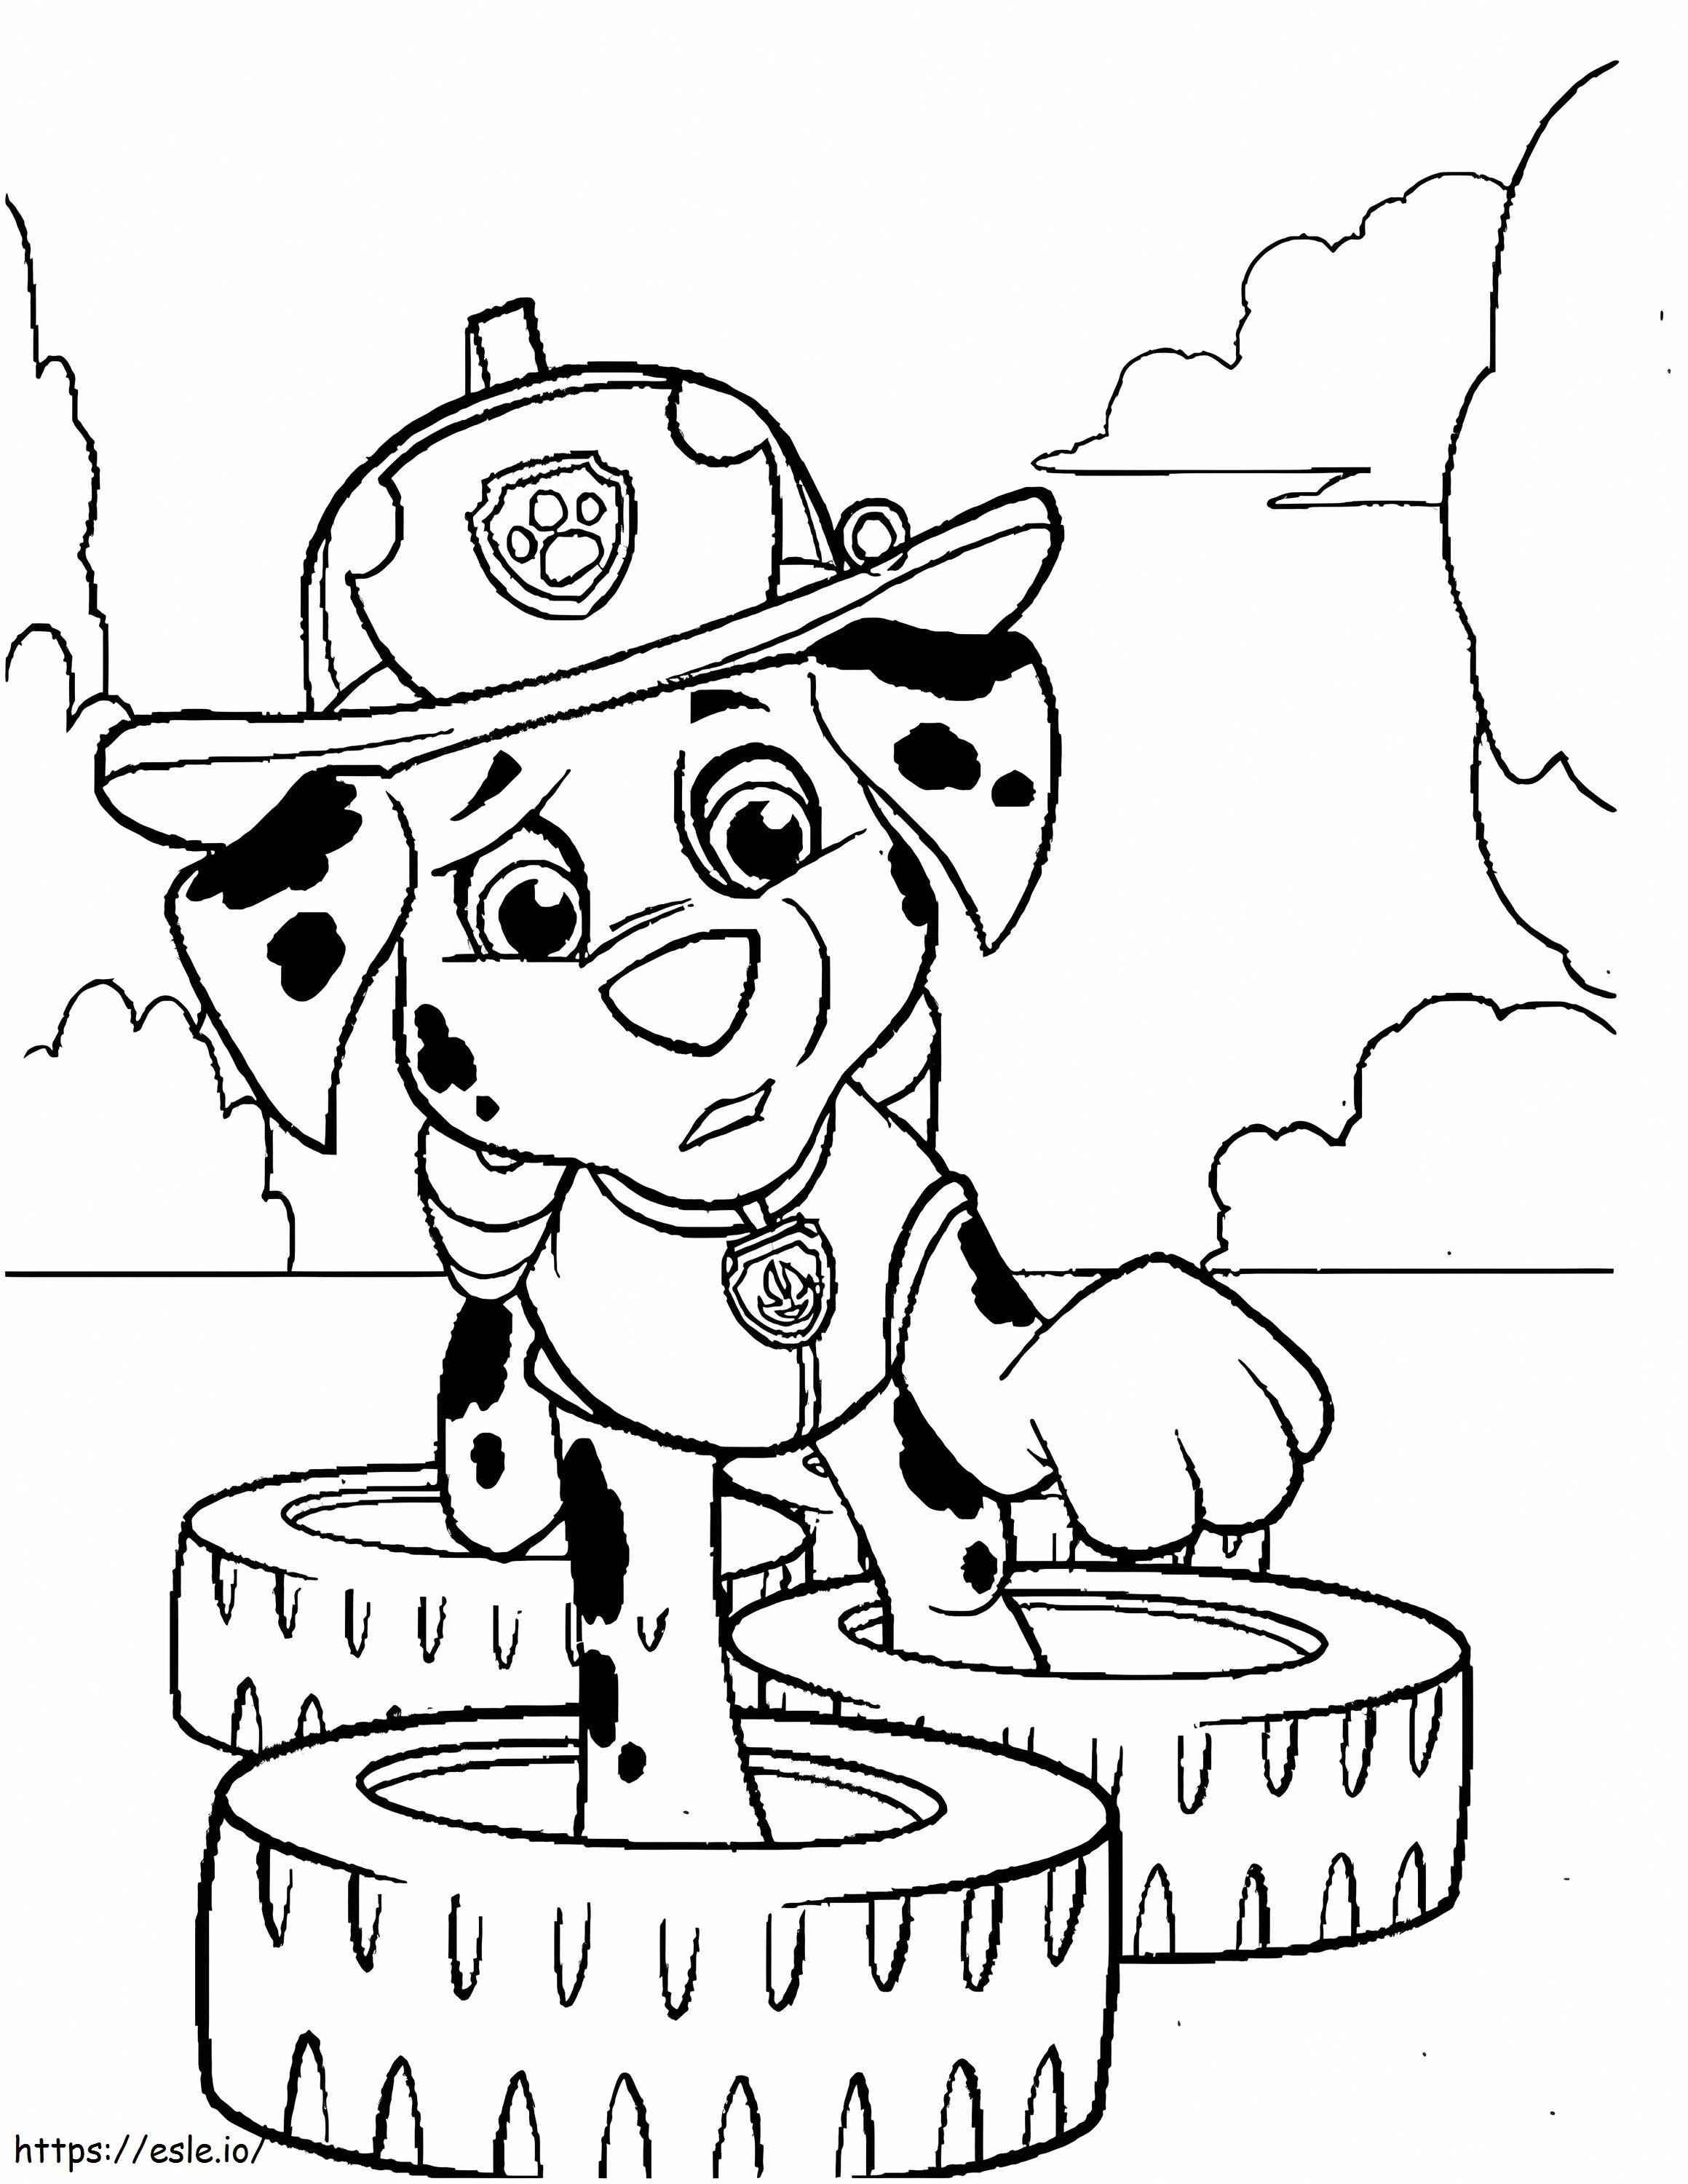 Marshall With Tire Obstacle Challenge coloring page